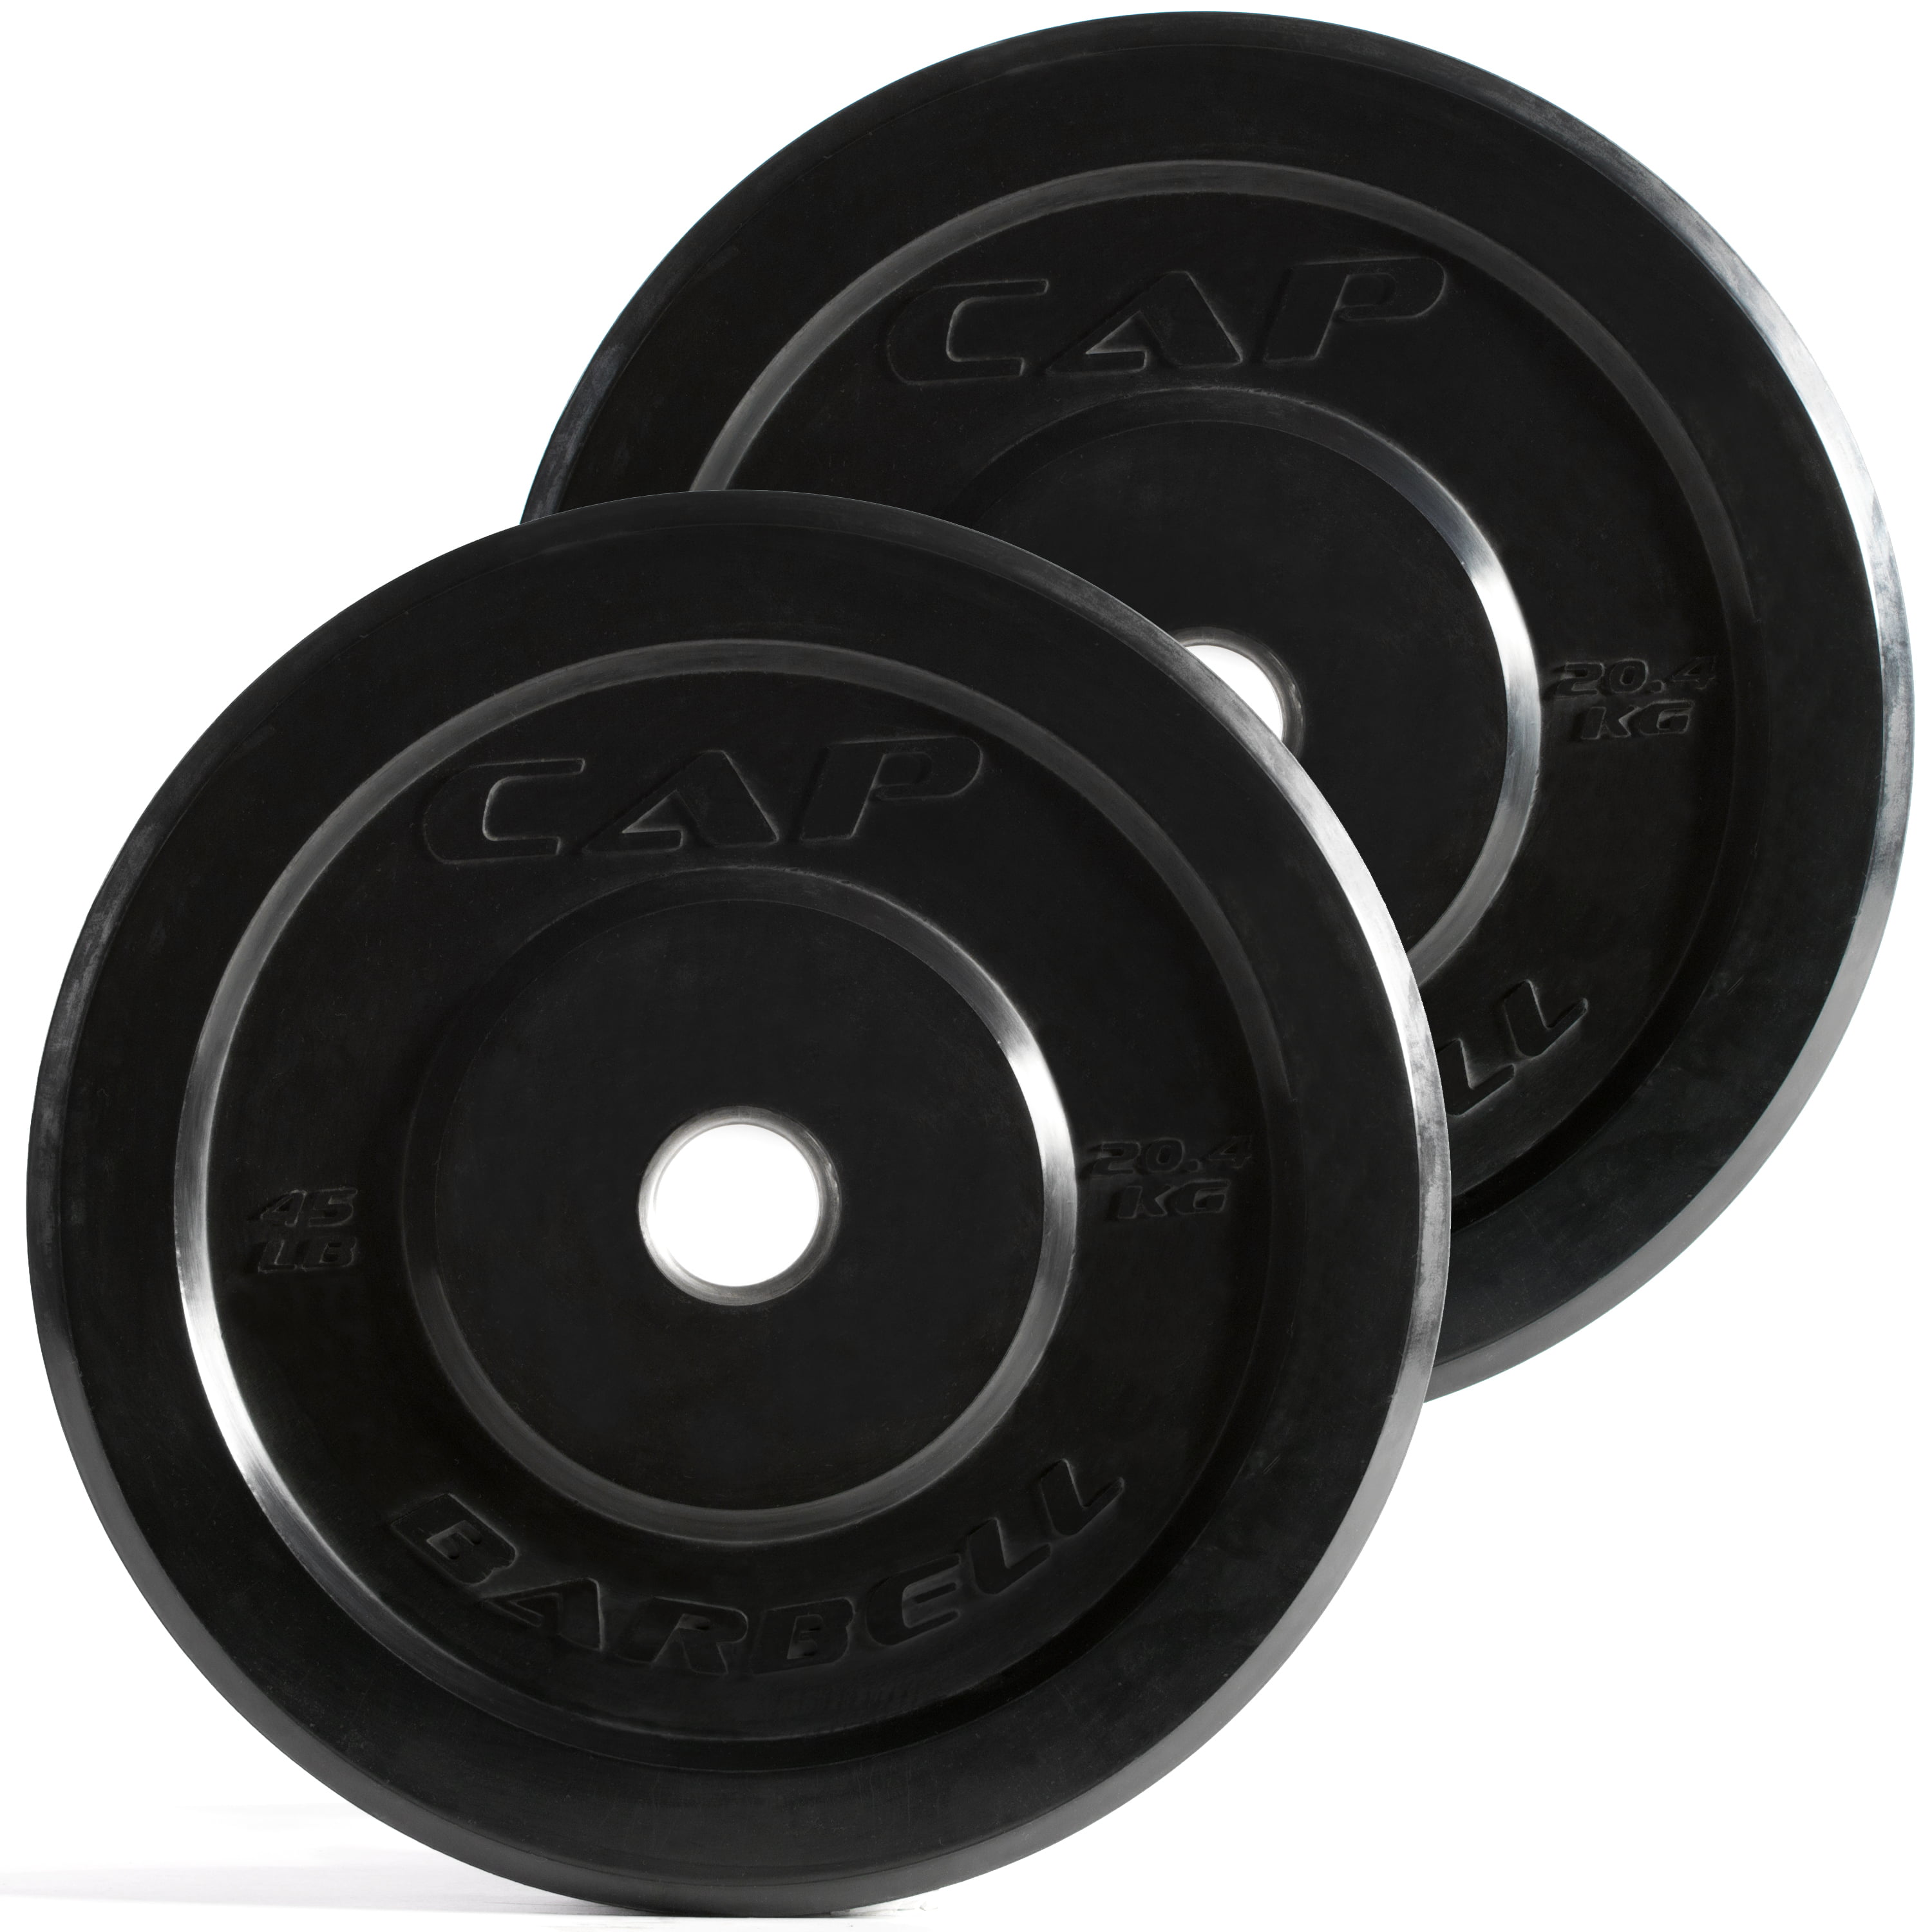 Brand New Fitness Gear 45lb Olympic 2” Weight Grip Plates set two 90lb total 